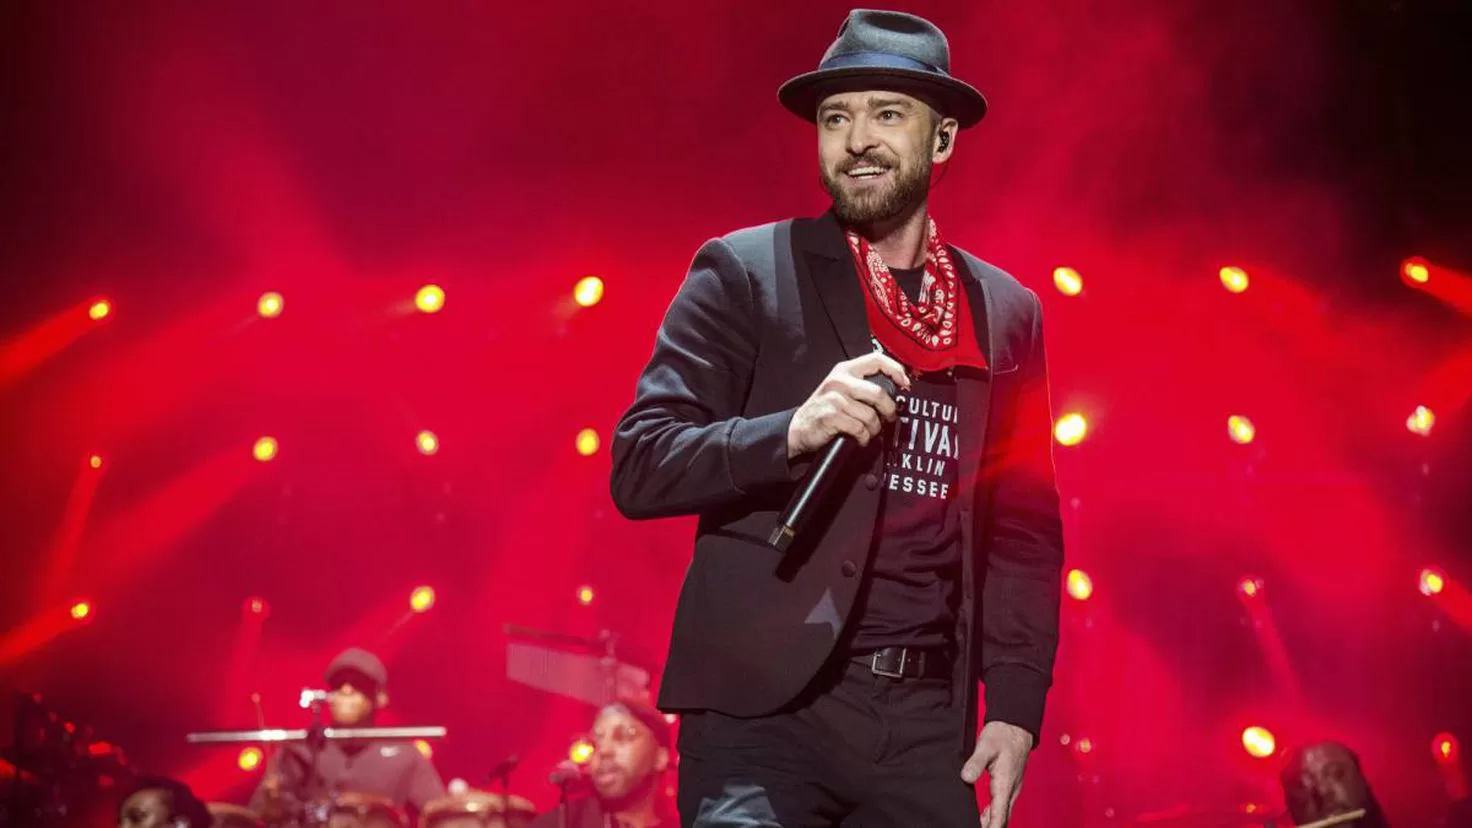 Justin Timberlake: As a man, you are taught not to express emotions
